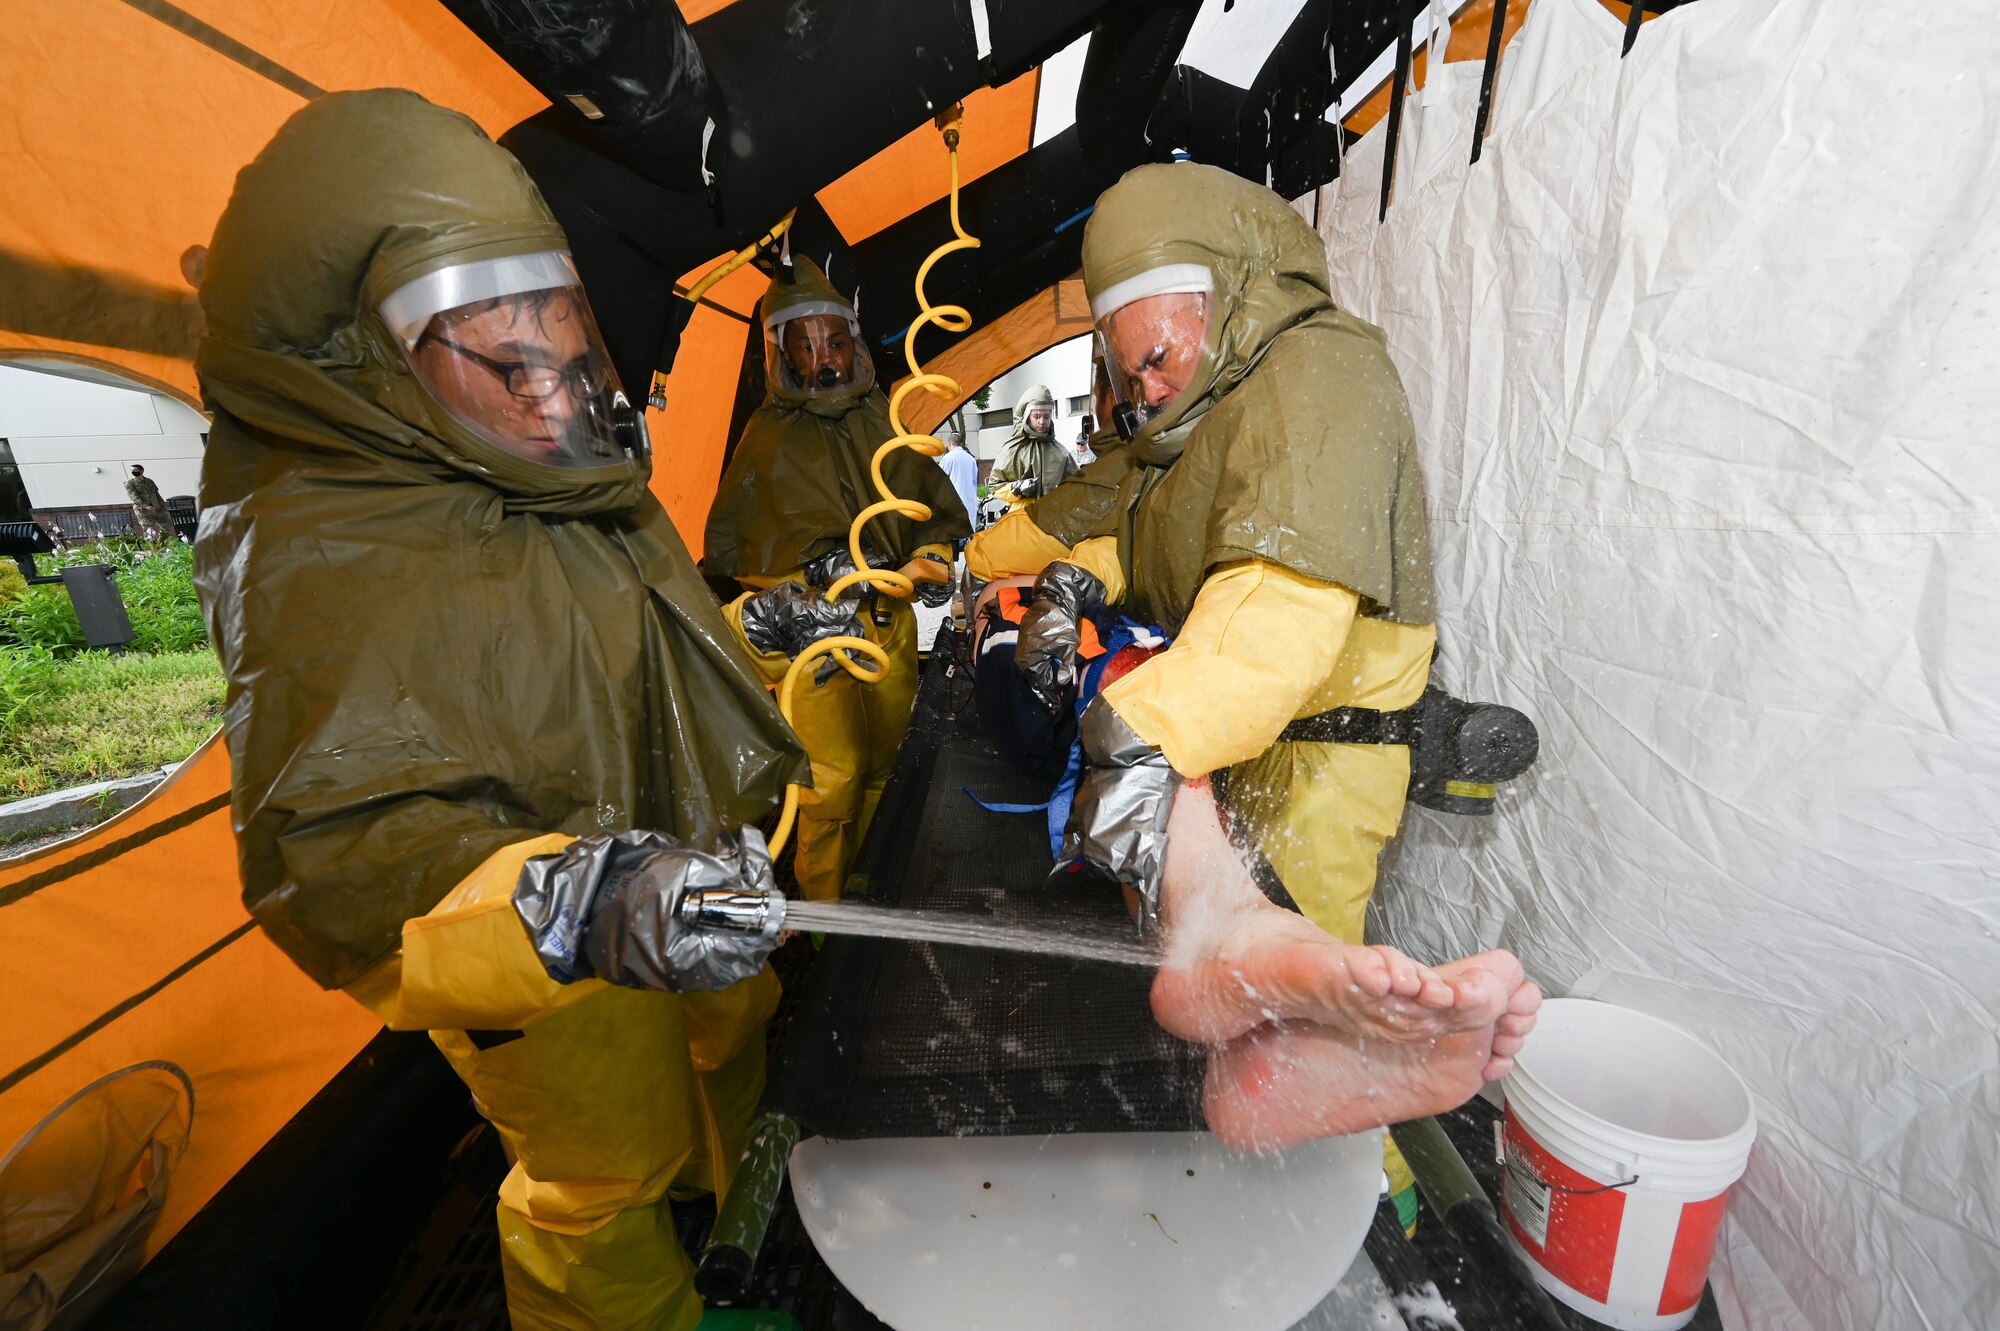 66th Medical Squadron In-Place Patient Decontamination Team members Airman 1st Class Ray Infante, left, and Master Sgt. Julio Arriola, participate in a Ready Eagle exercise at Hanscom Air Force Base, Mass., July 30. The full-scale disaster response exercise tested Hanscom medics on their response to a chemical, biological, radiological, nuclear or explosive event. (U.S. Air Force photo by Todd Maki)